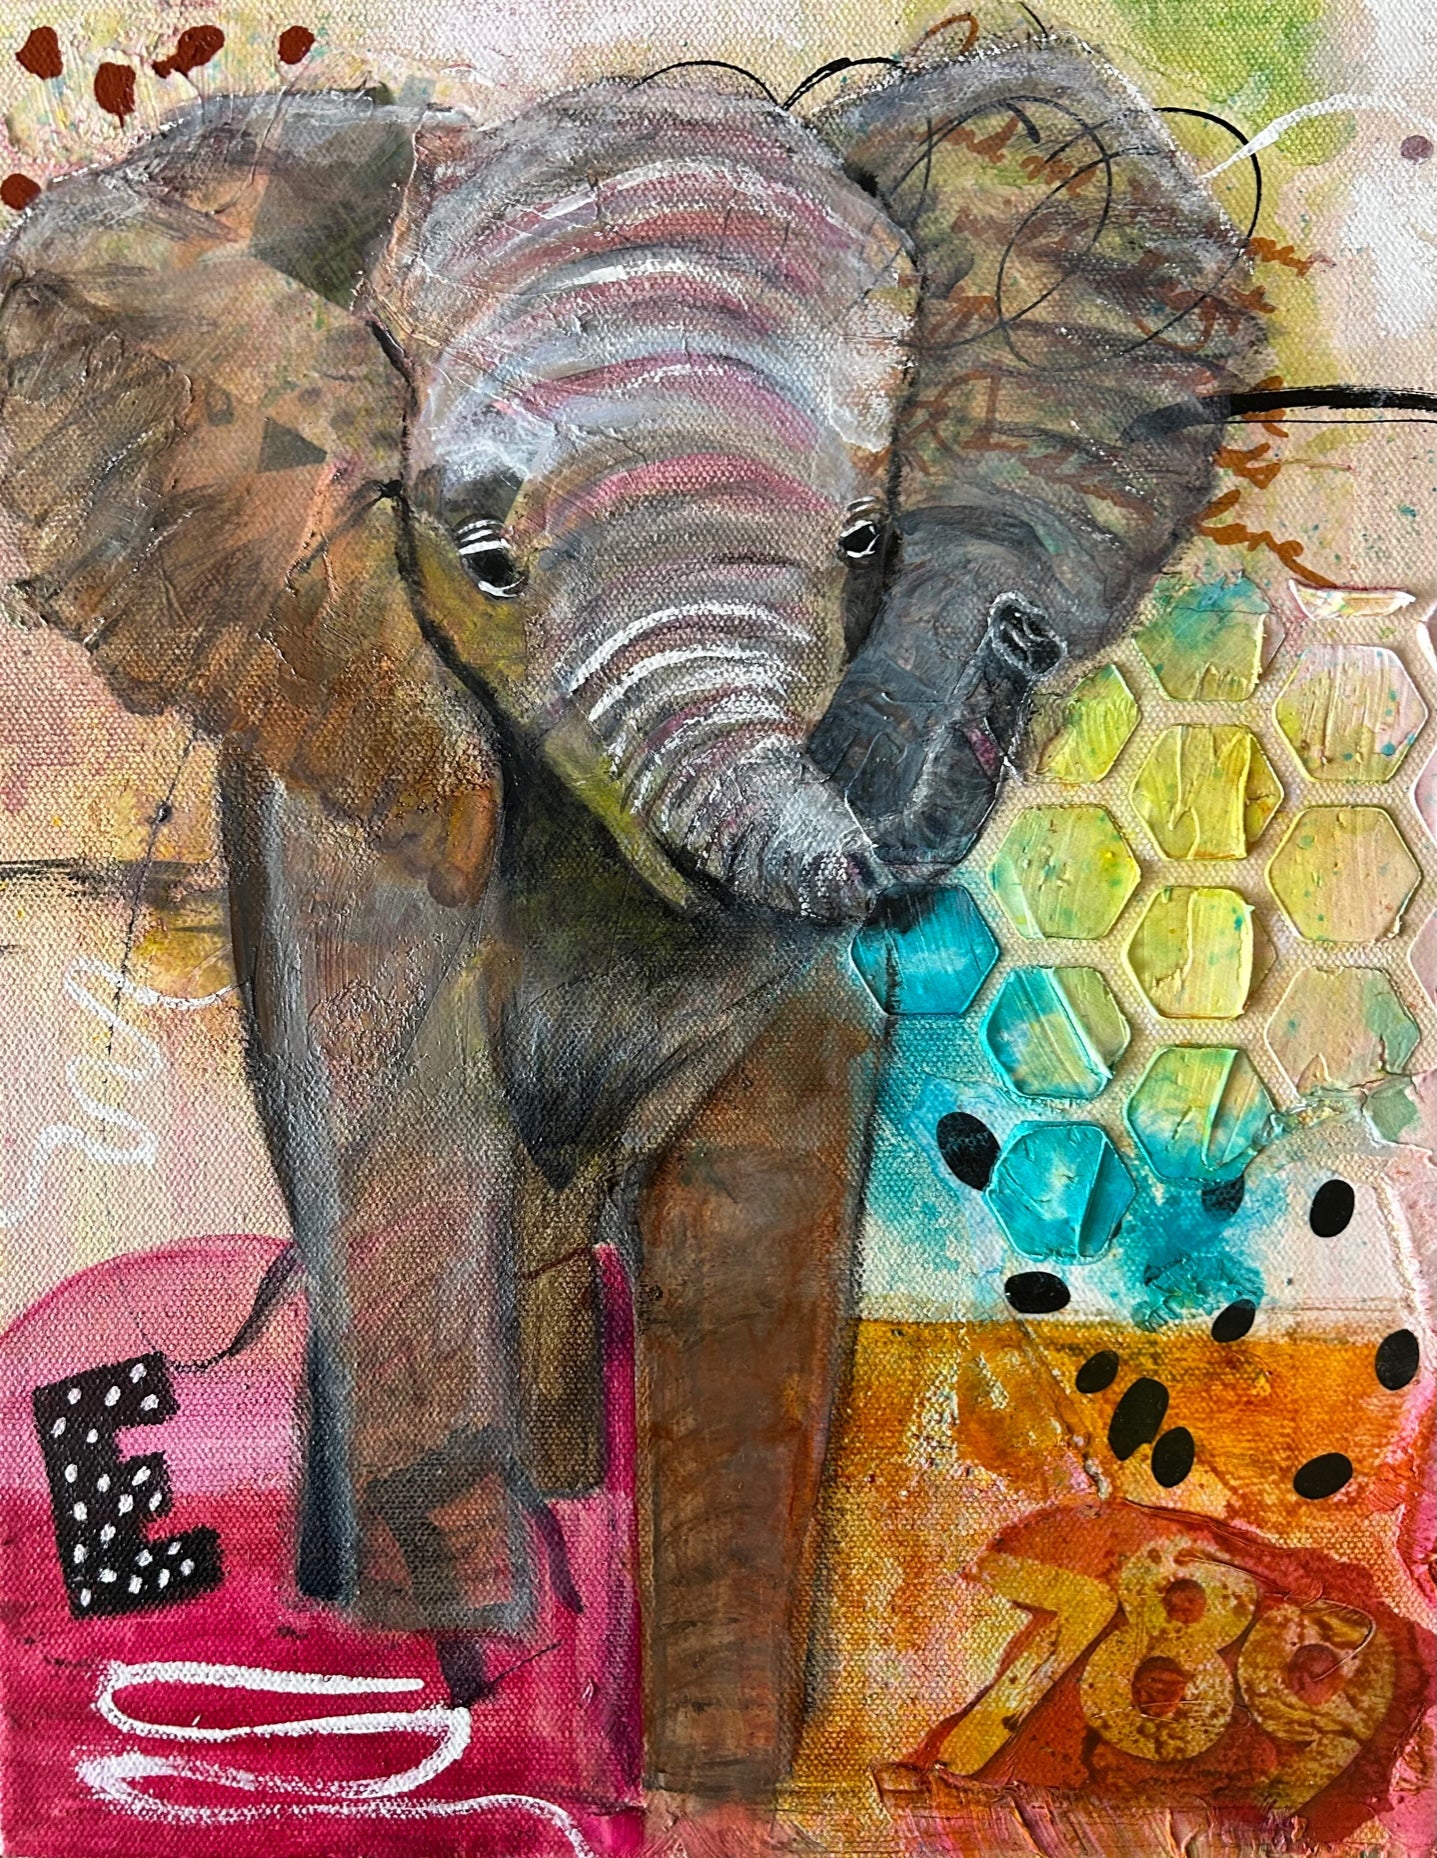 E is for Elephant matted Giclee art print